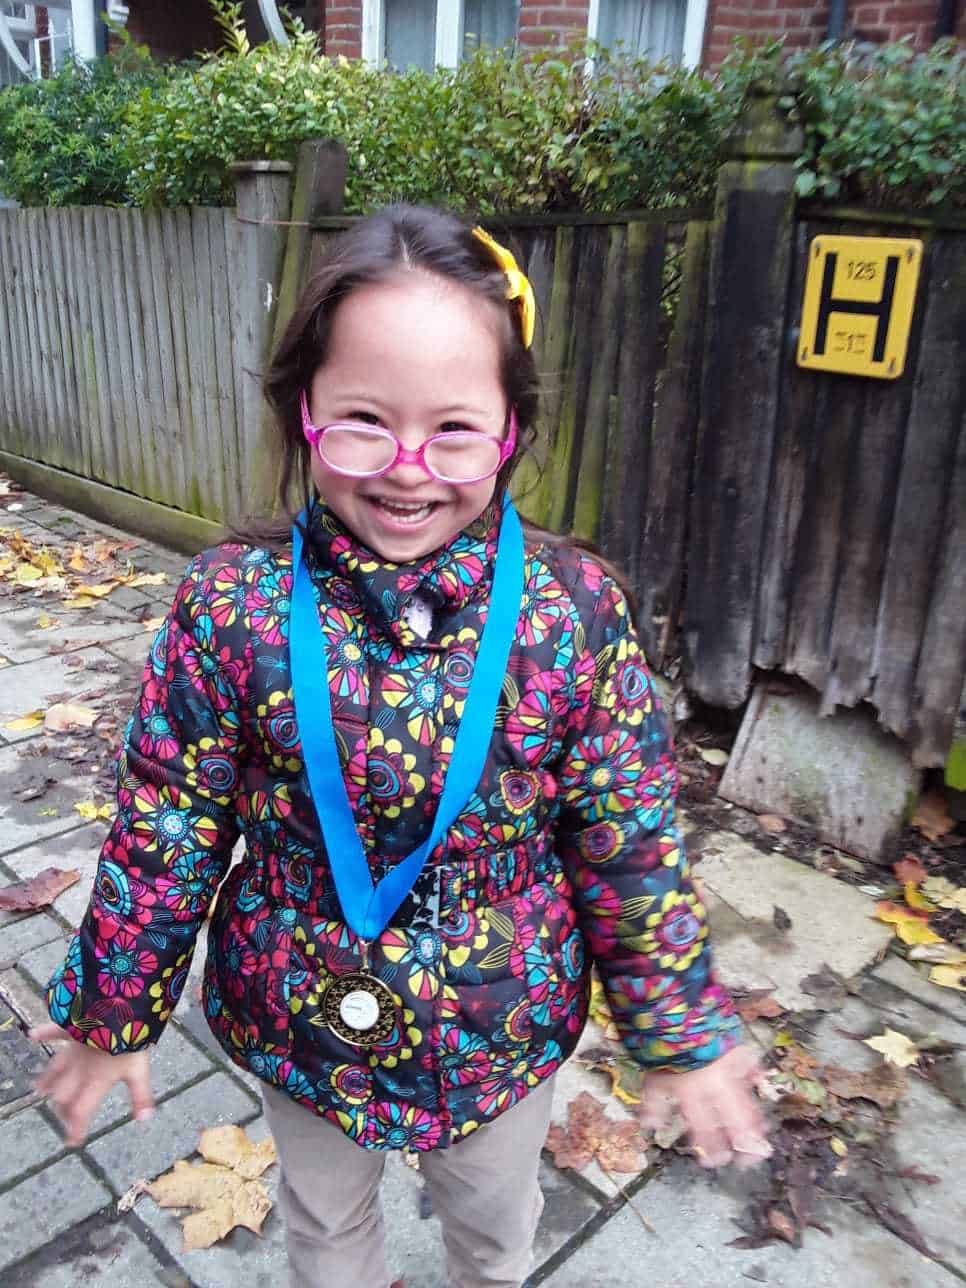 15 children with Down’s Syndrome beat all expectations